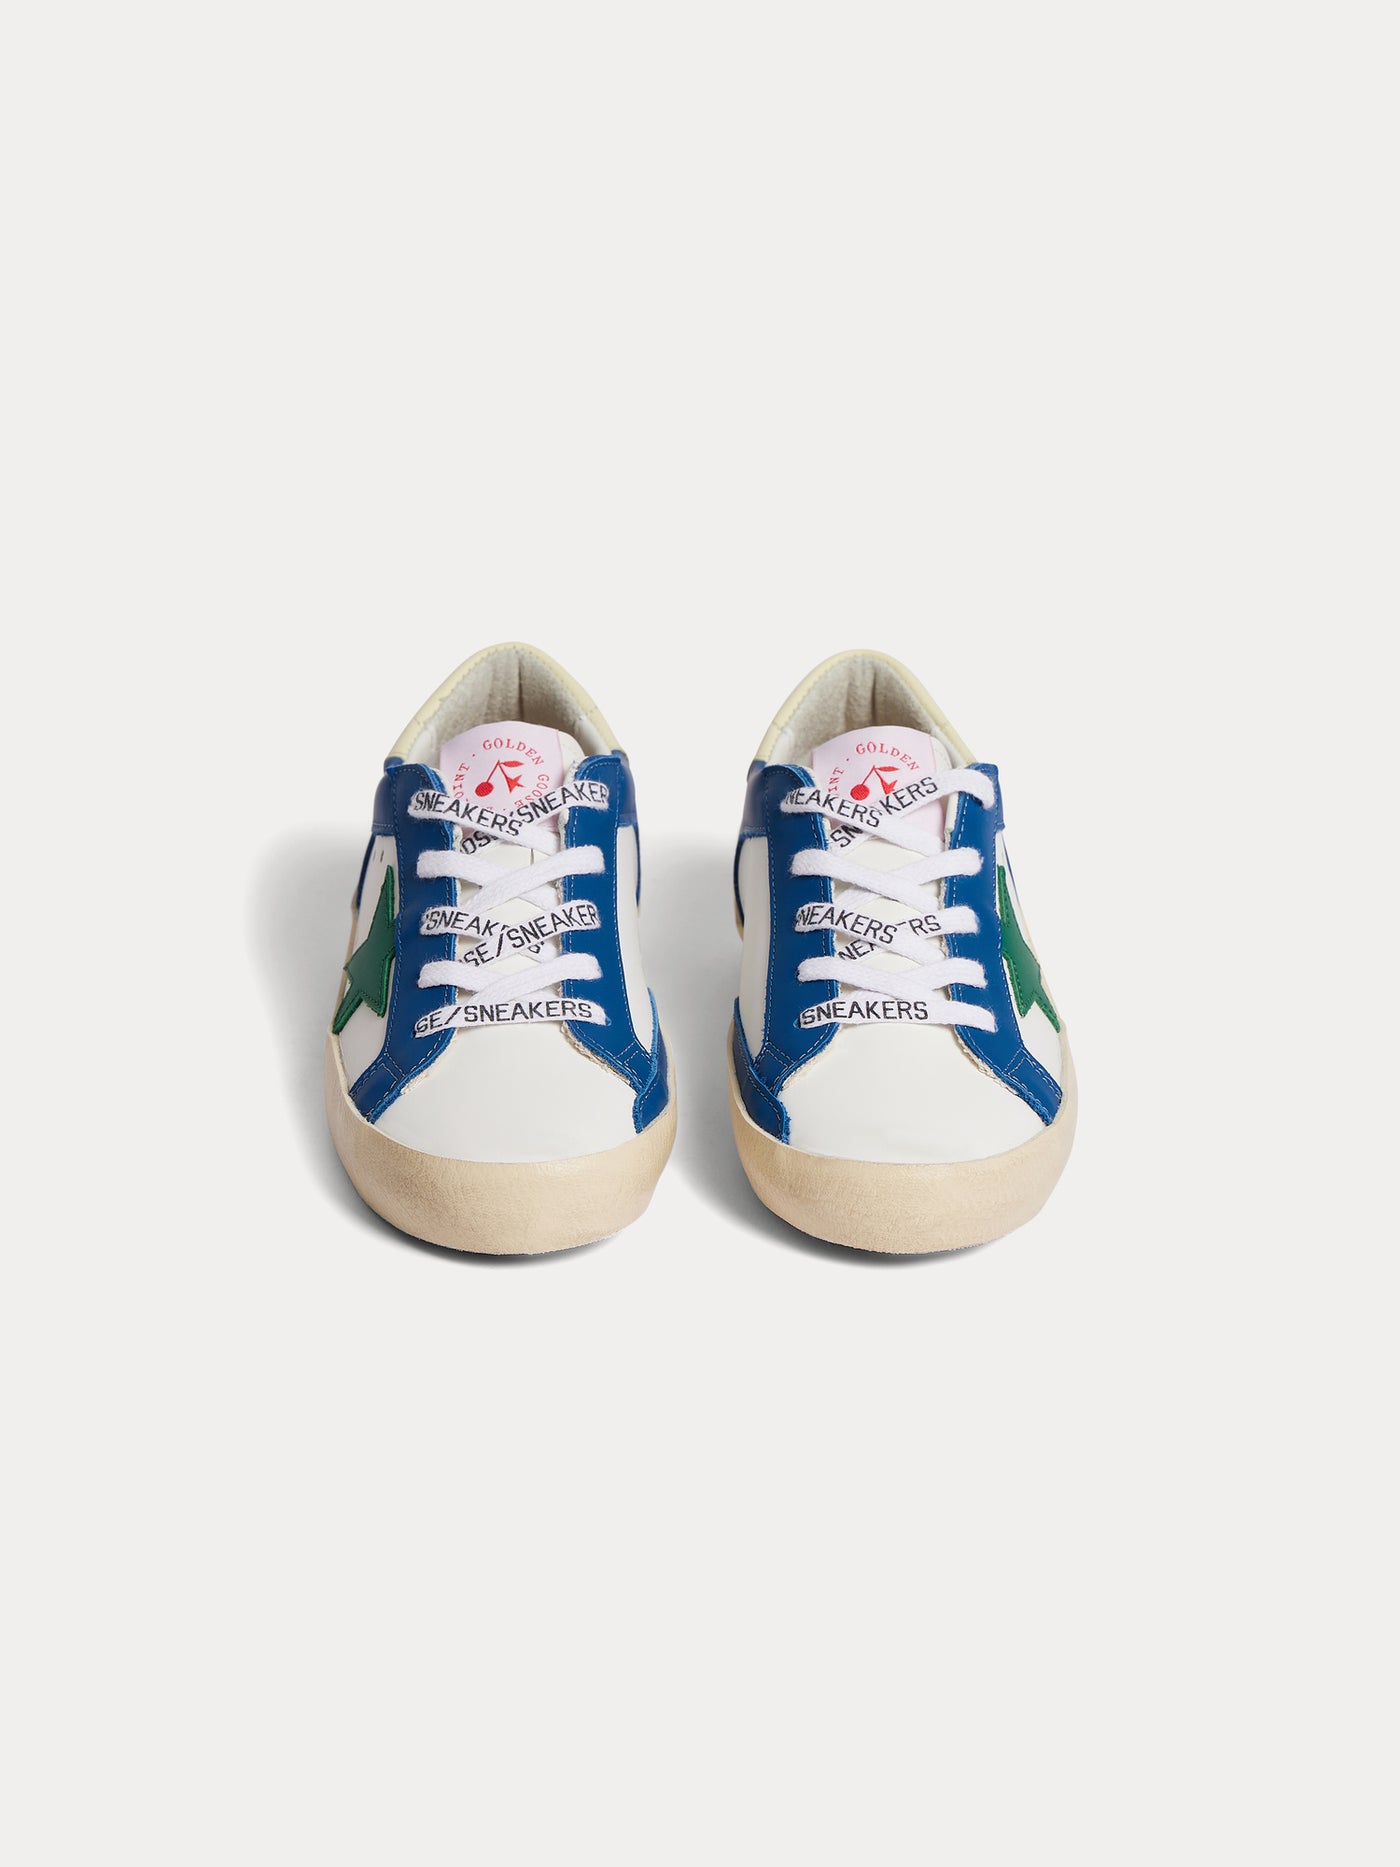 Bonpoint x Golden Goose Sneakers Northern Blue